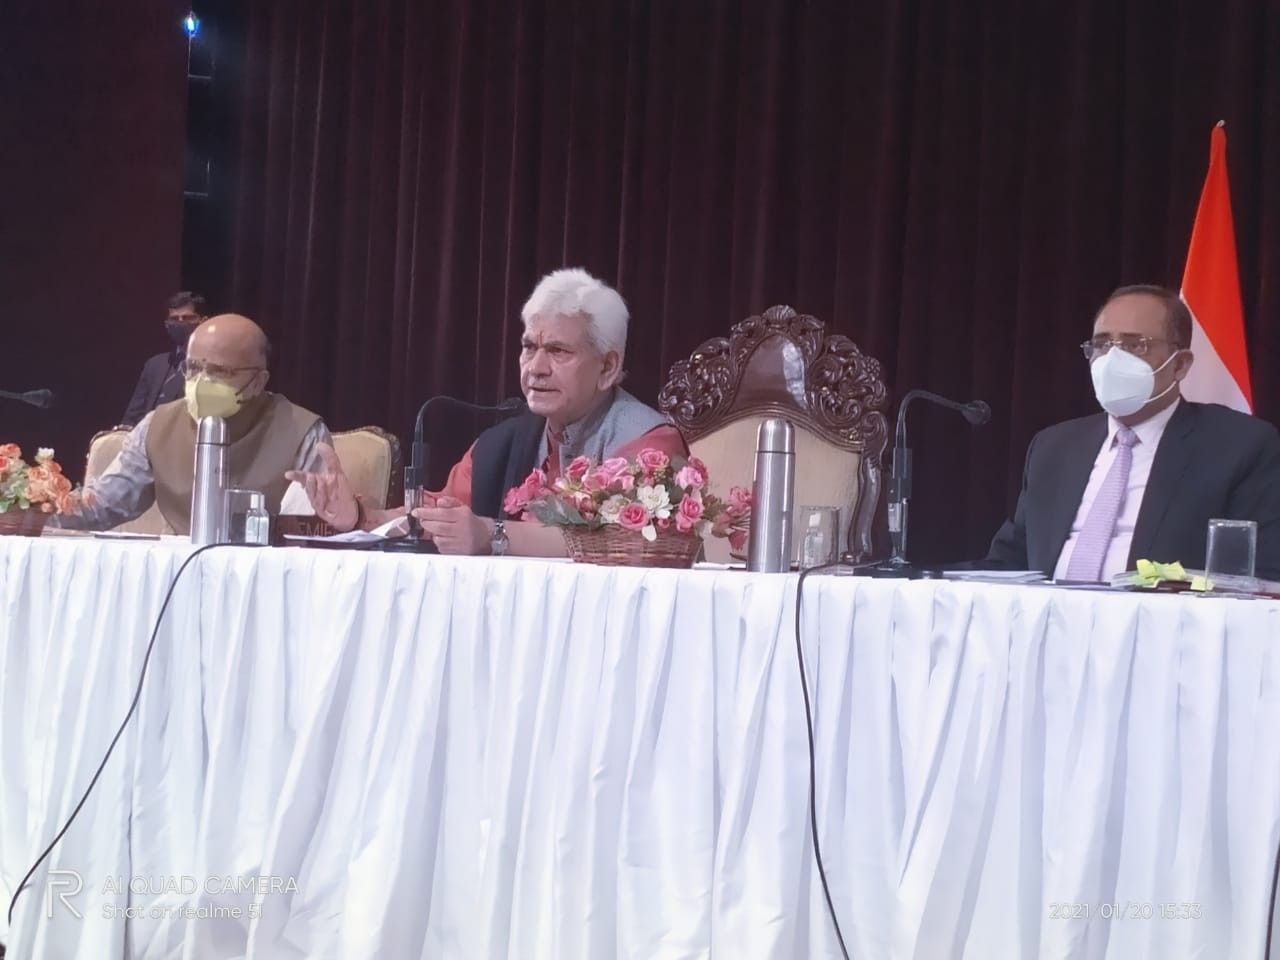  Rattle Hydroelectric Power Project will generate atleast 4000 employment avenues in J&K:m LG Manoj Sinha